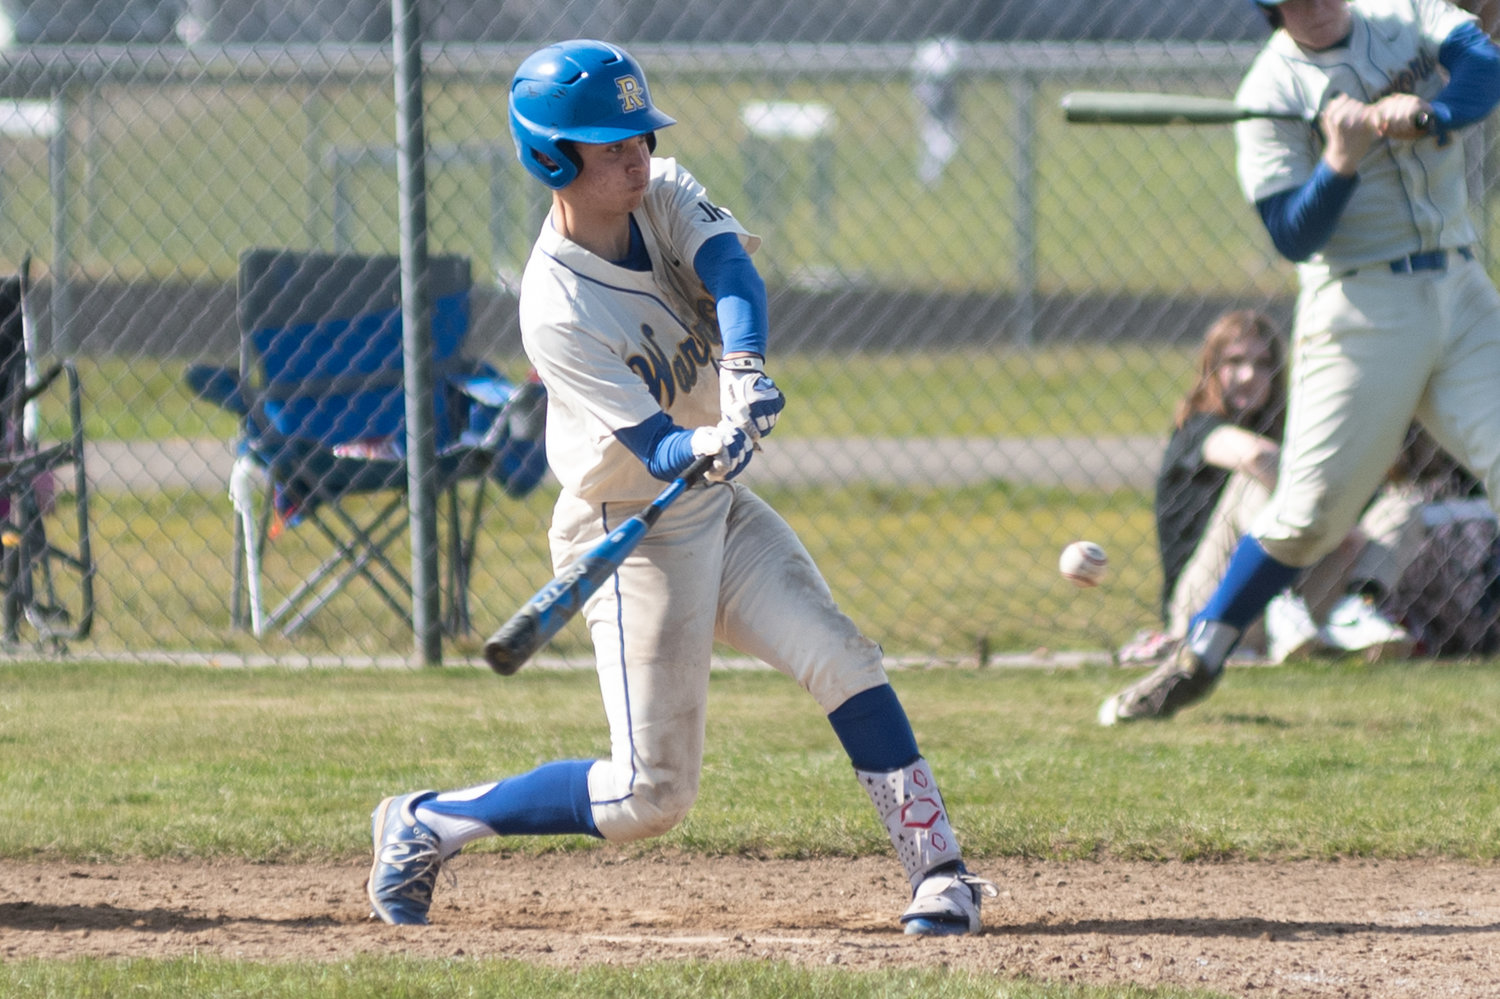 Rochester's Tony Groninger takes a swing against Tenino in the Scatter Creek Derby March 12.